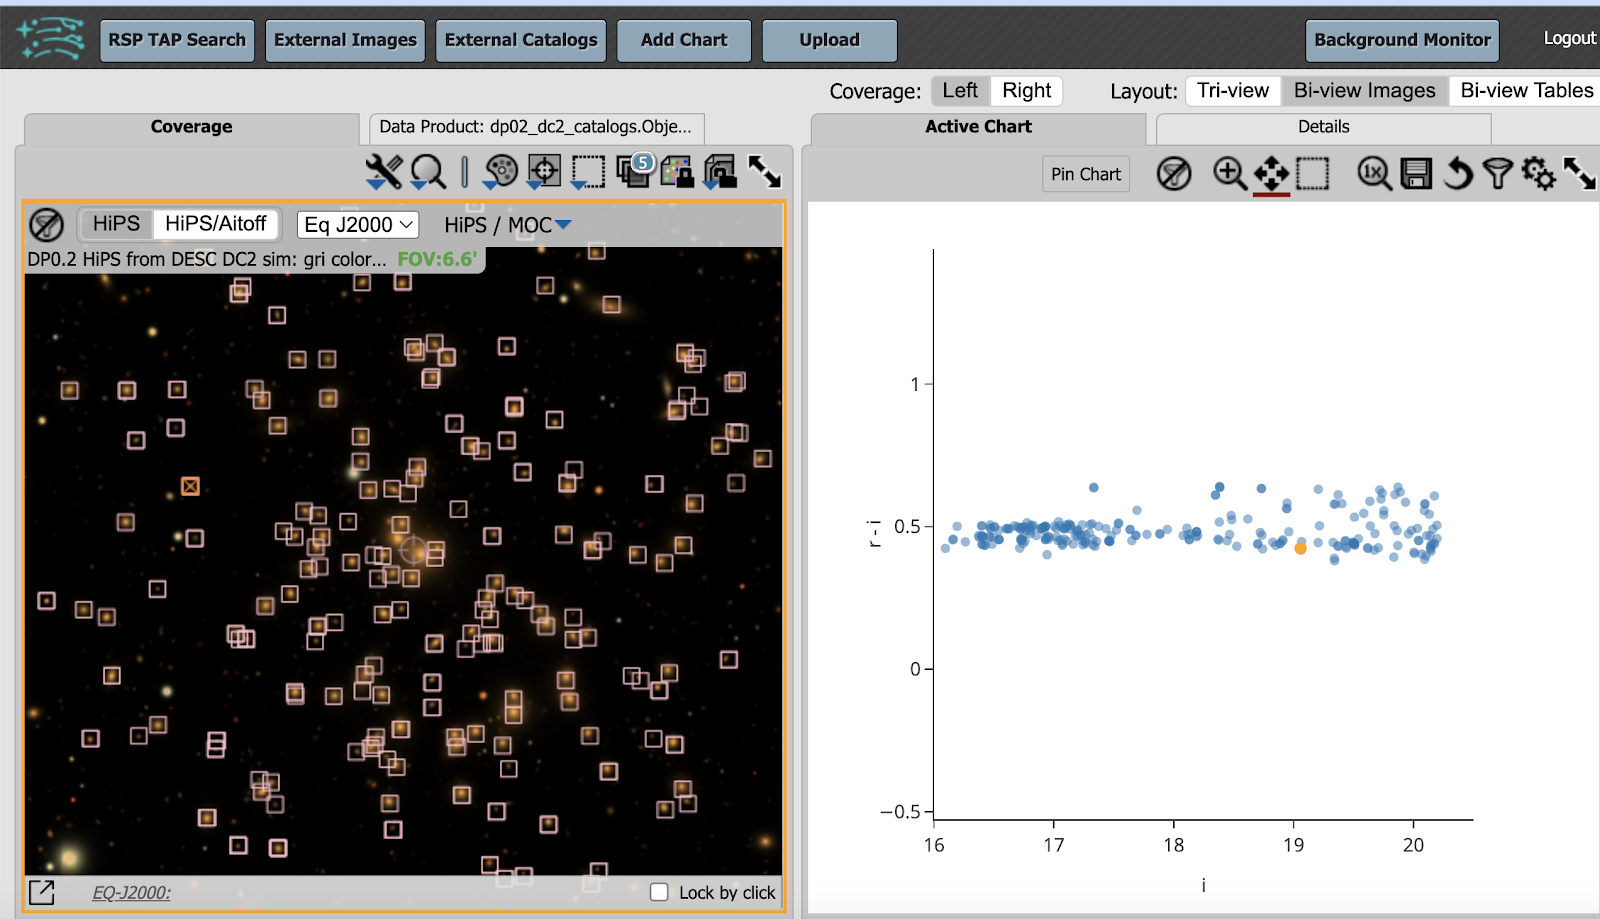 A screenshot of the Portal Aspect of the Rubin Science Platform with two panels. The left panel shows a galaxy cluster from the DC2 simulation with squares identifying the cluster members explicitly, and the right panel plots the cluster "red sequence" as an "r-i" vs "i" color-magnitude plot.